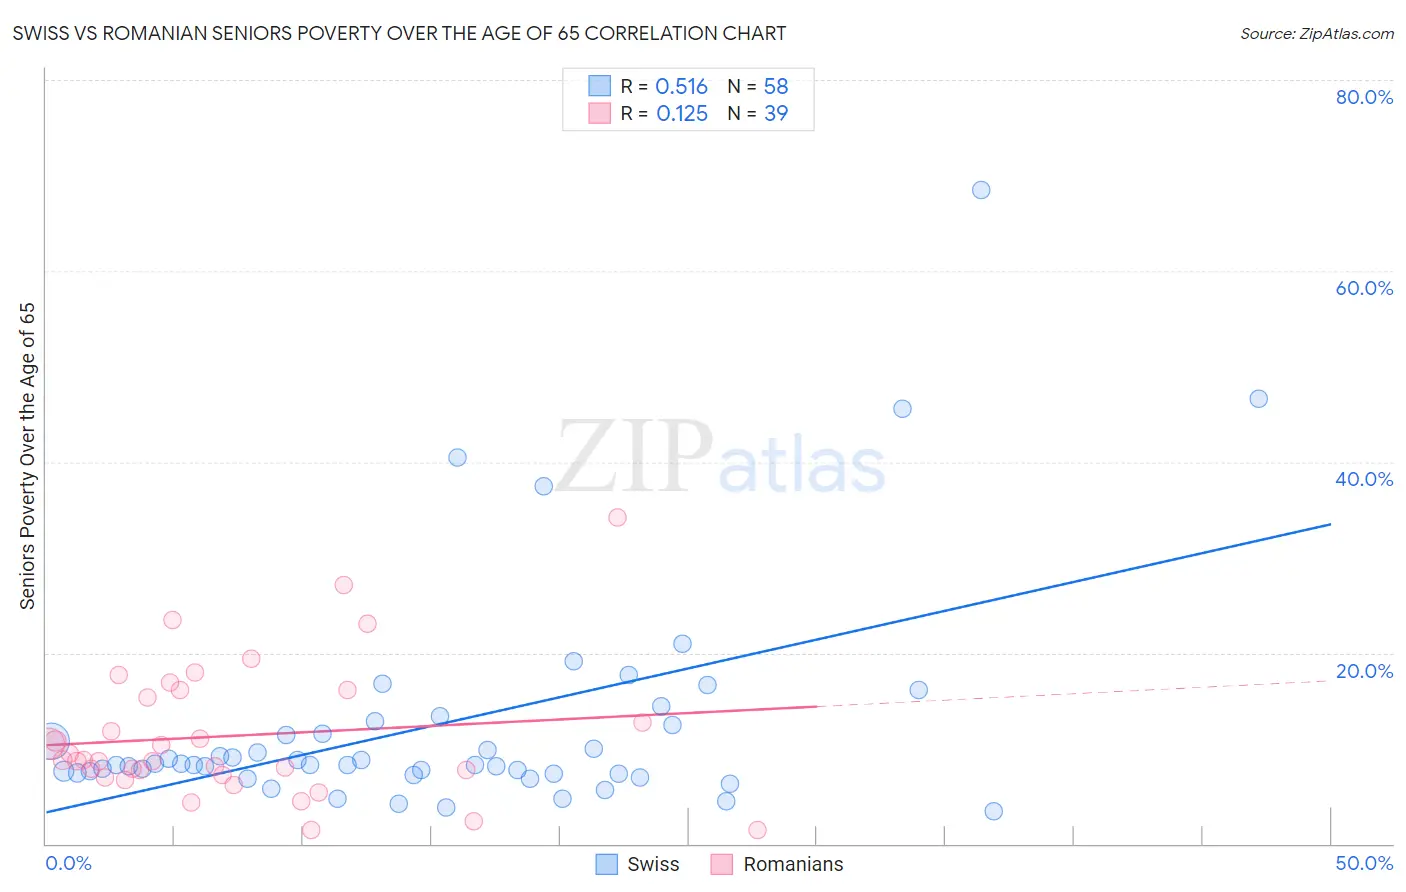 Swiss vs Romanian Seniors Poverty Over the Age of 65